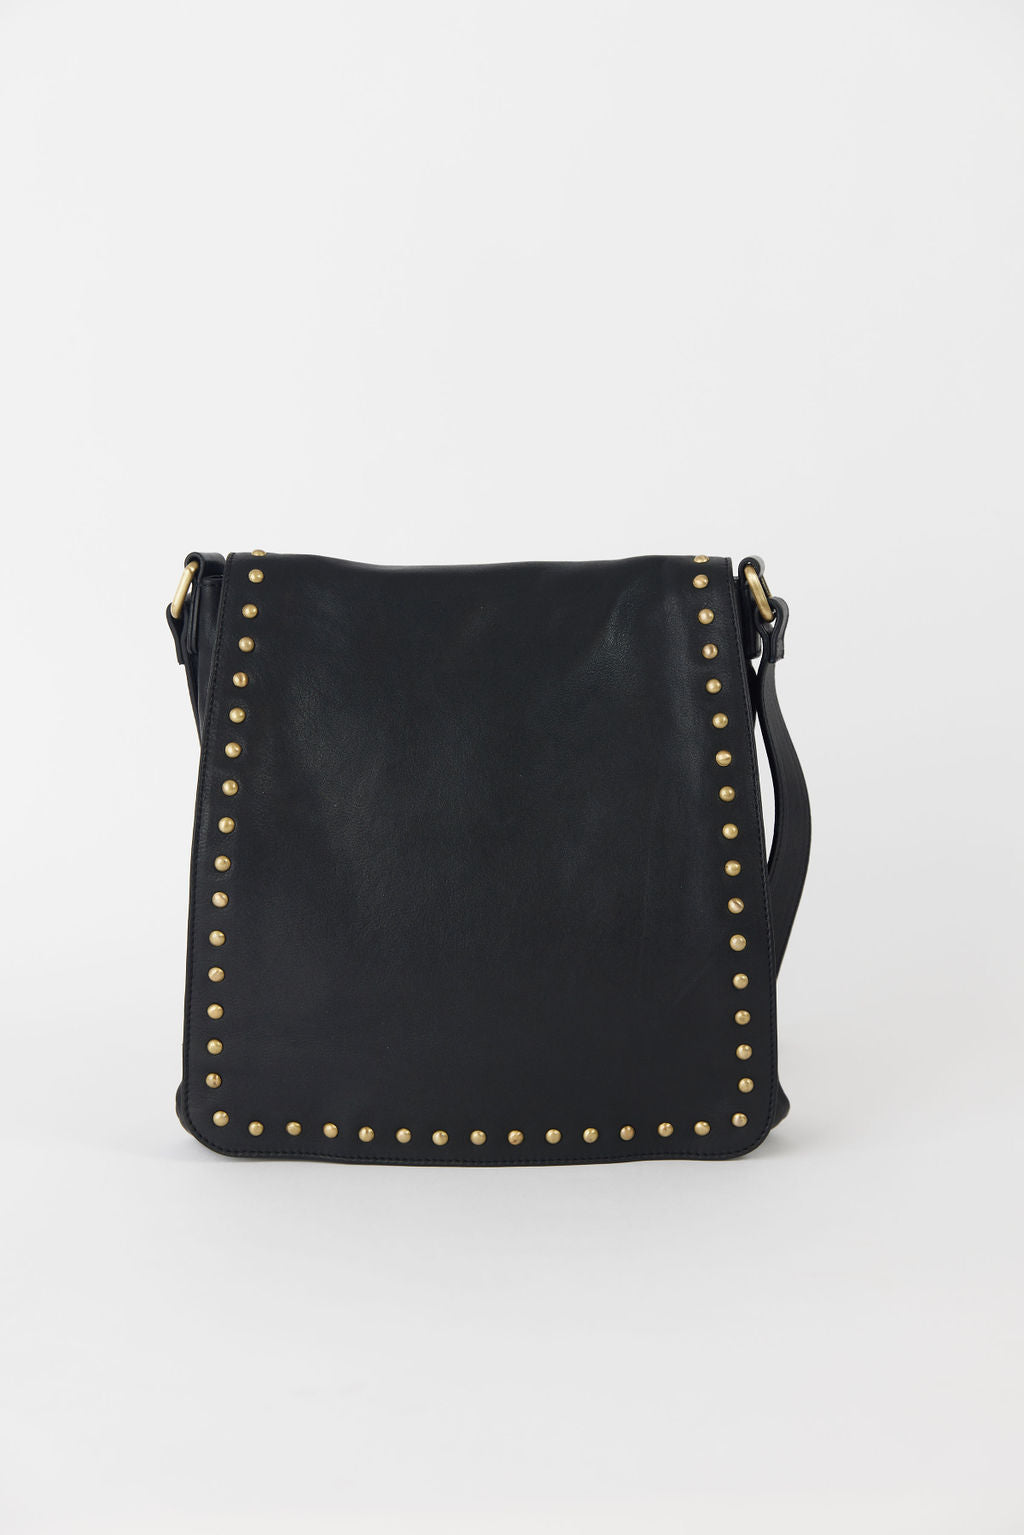 Kingsley Leather Bag Black - EXCLUSIVE TO MINT